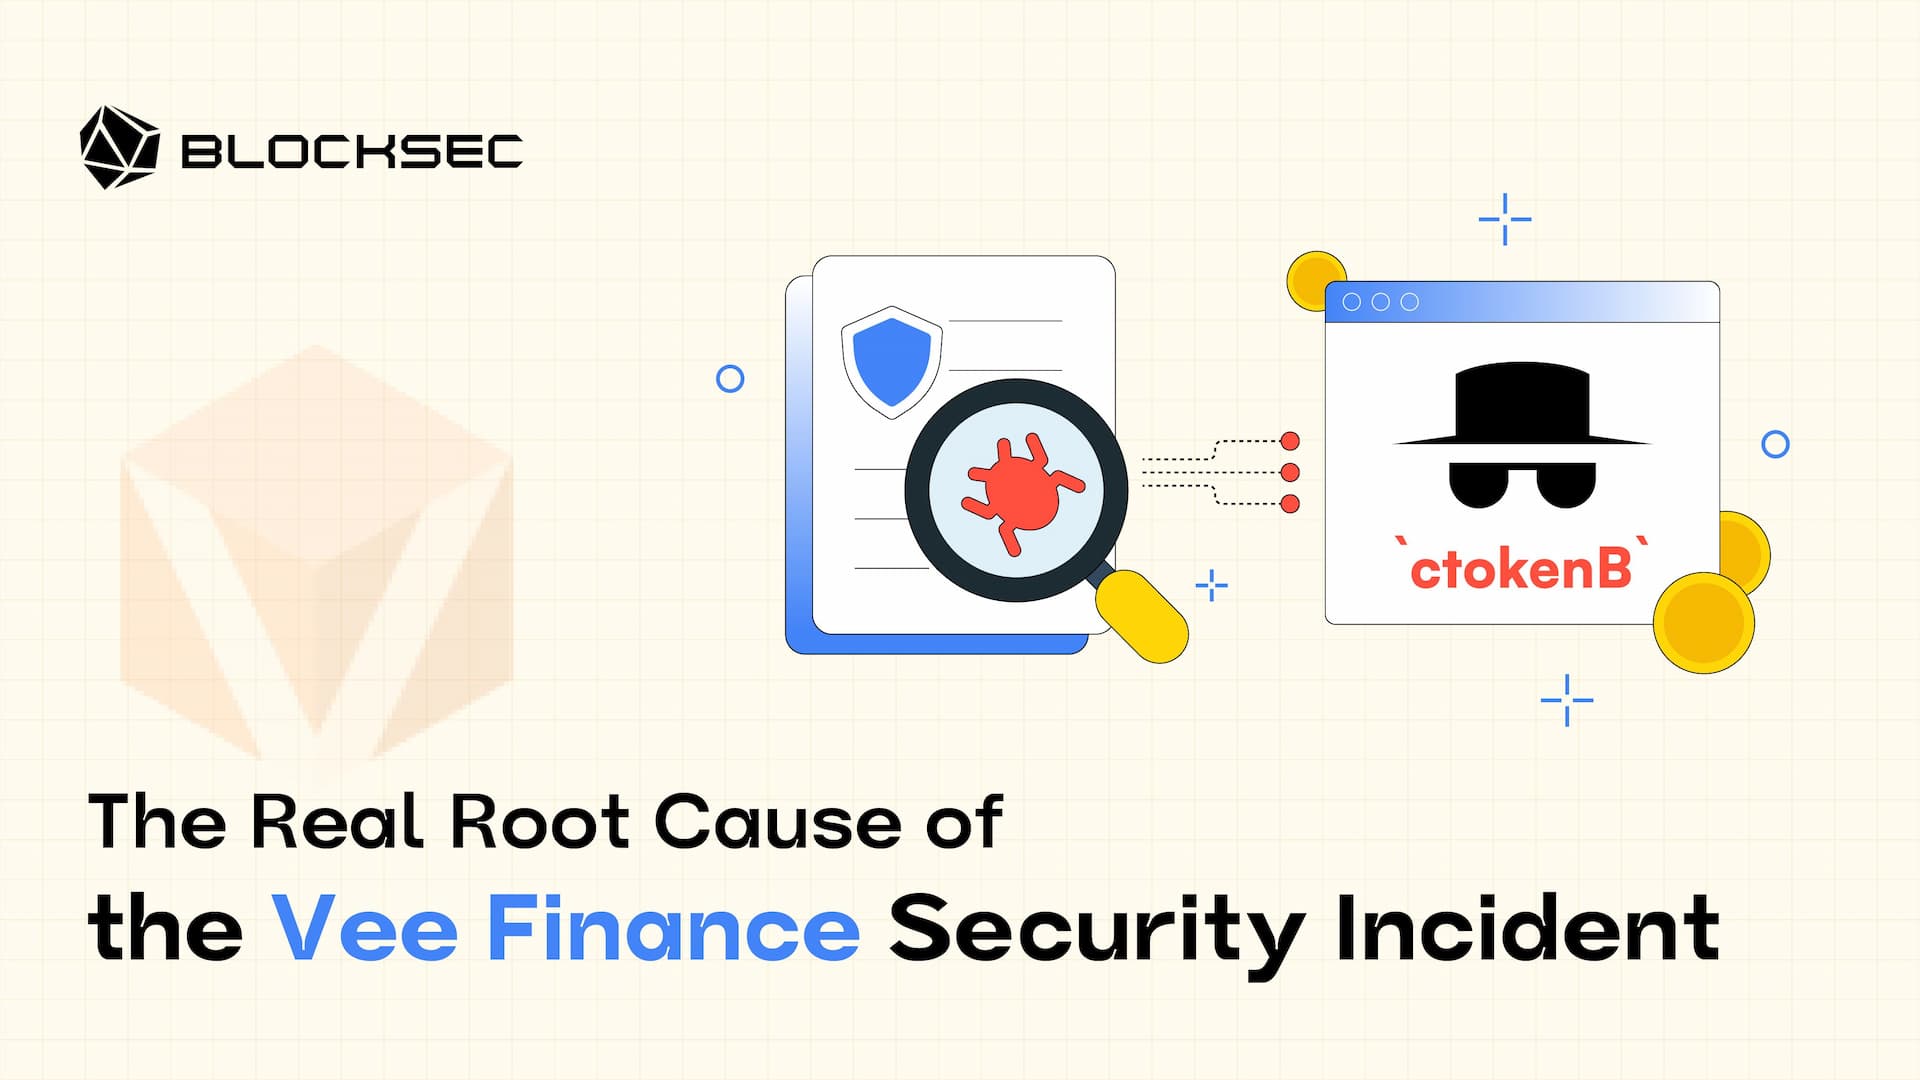 The Real Root Cause of the Vee Finance Security Incident